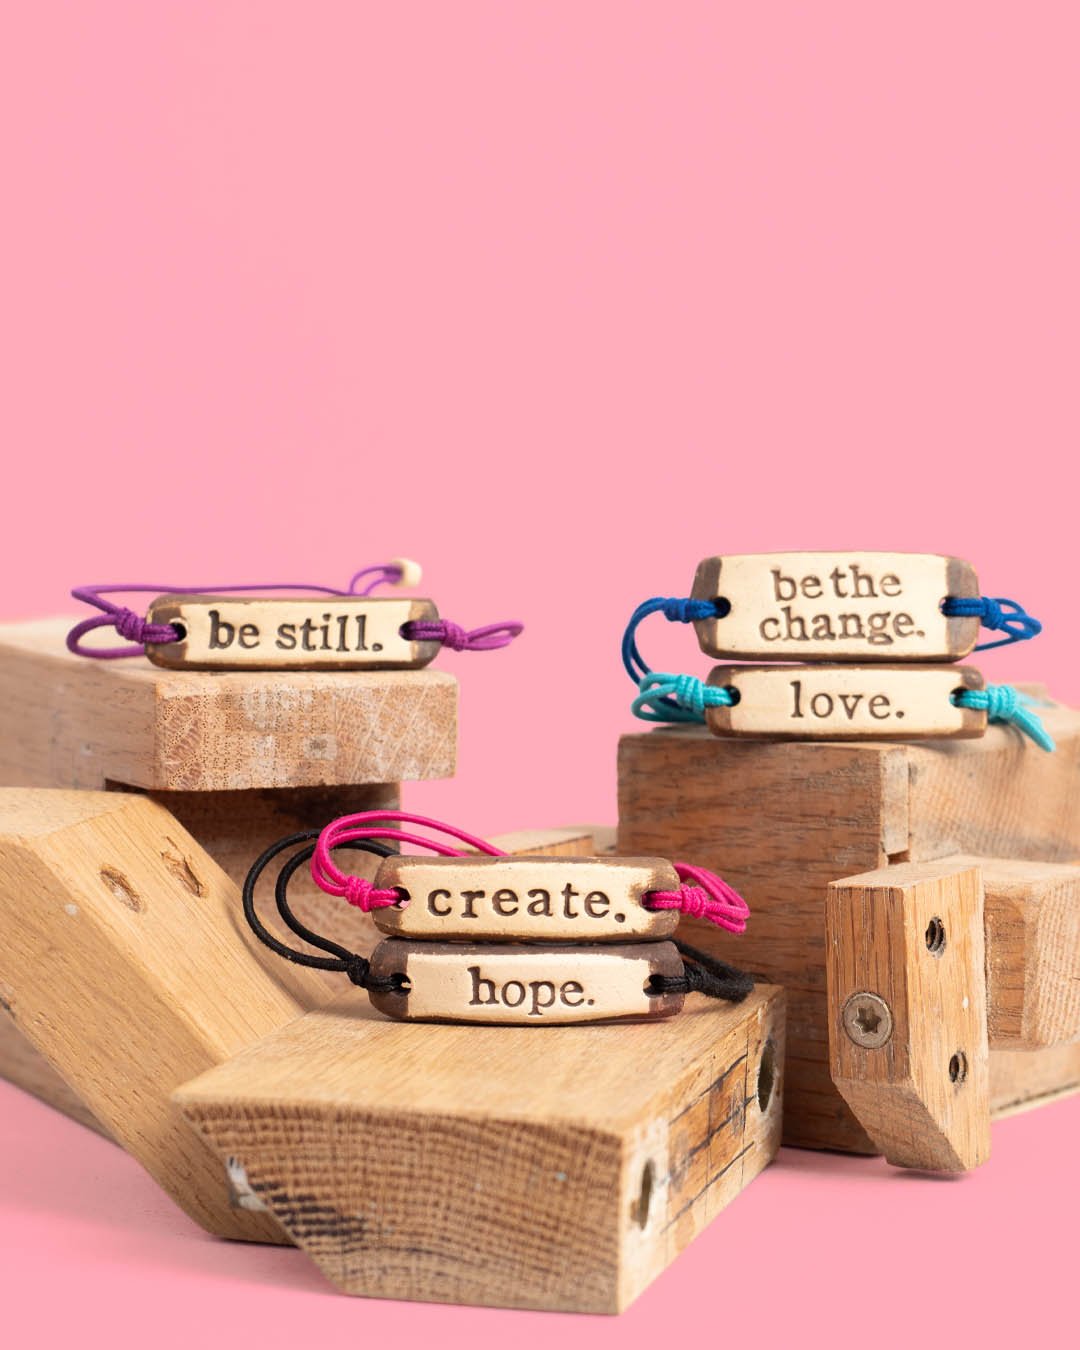 10 best gifts for teens : Inspirational  bracelets from MudLove + a donation | Small Business Holiday Gifts 2020